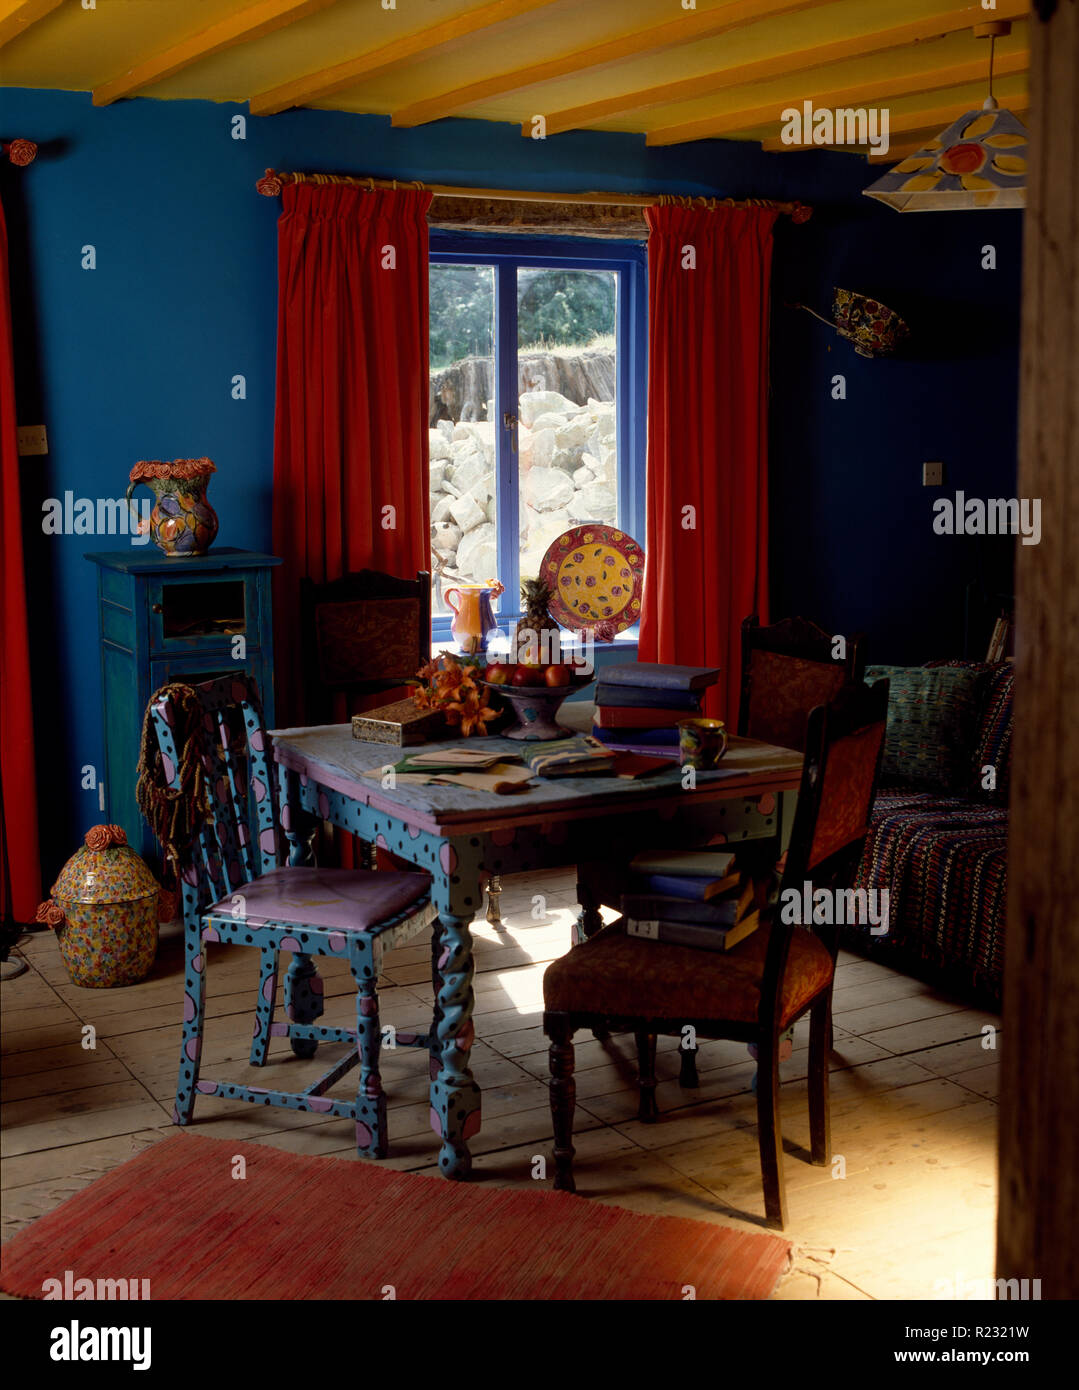 Colourfully painted table and chairs in bright blue dining room Stock Photo